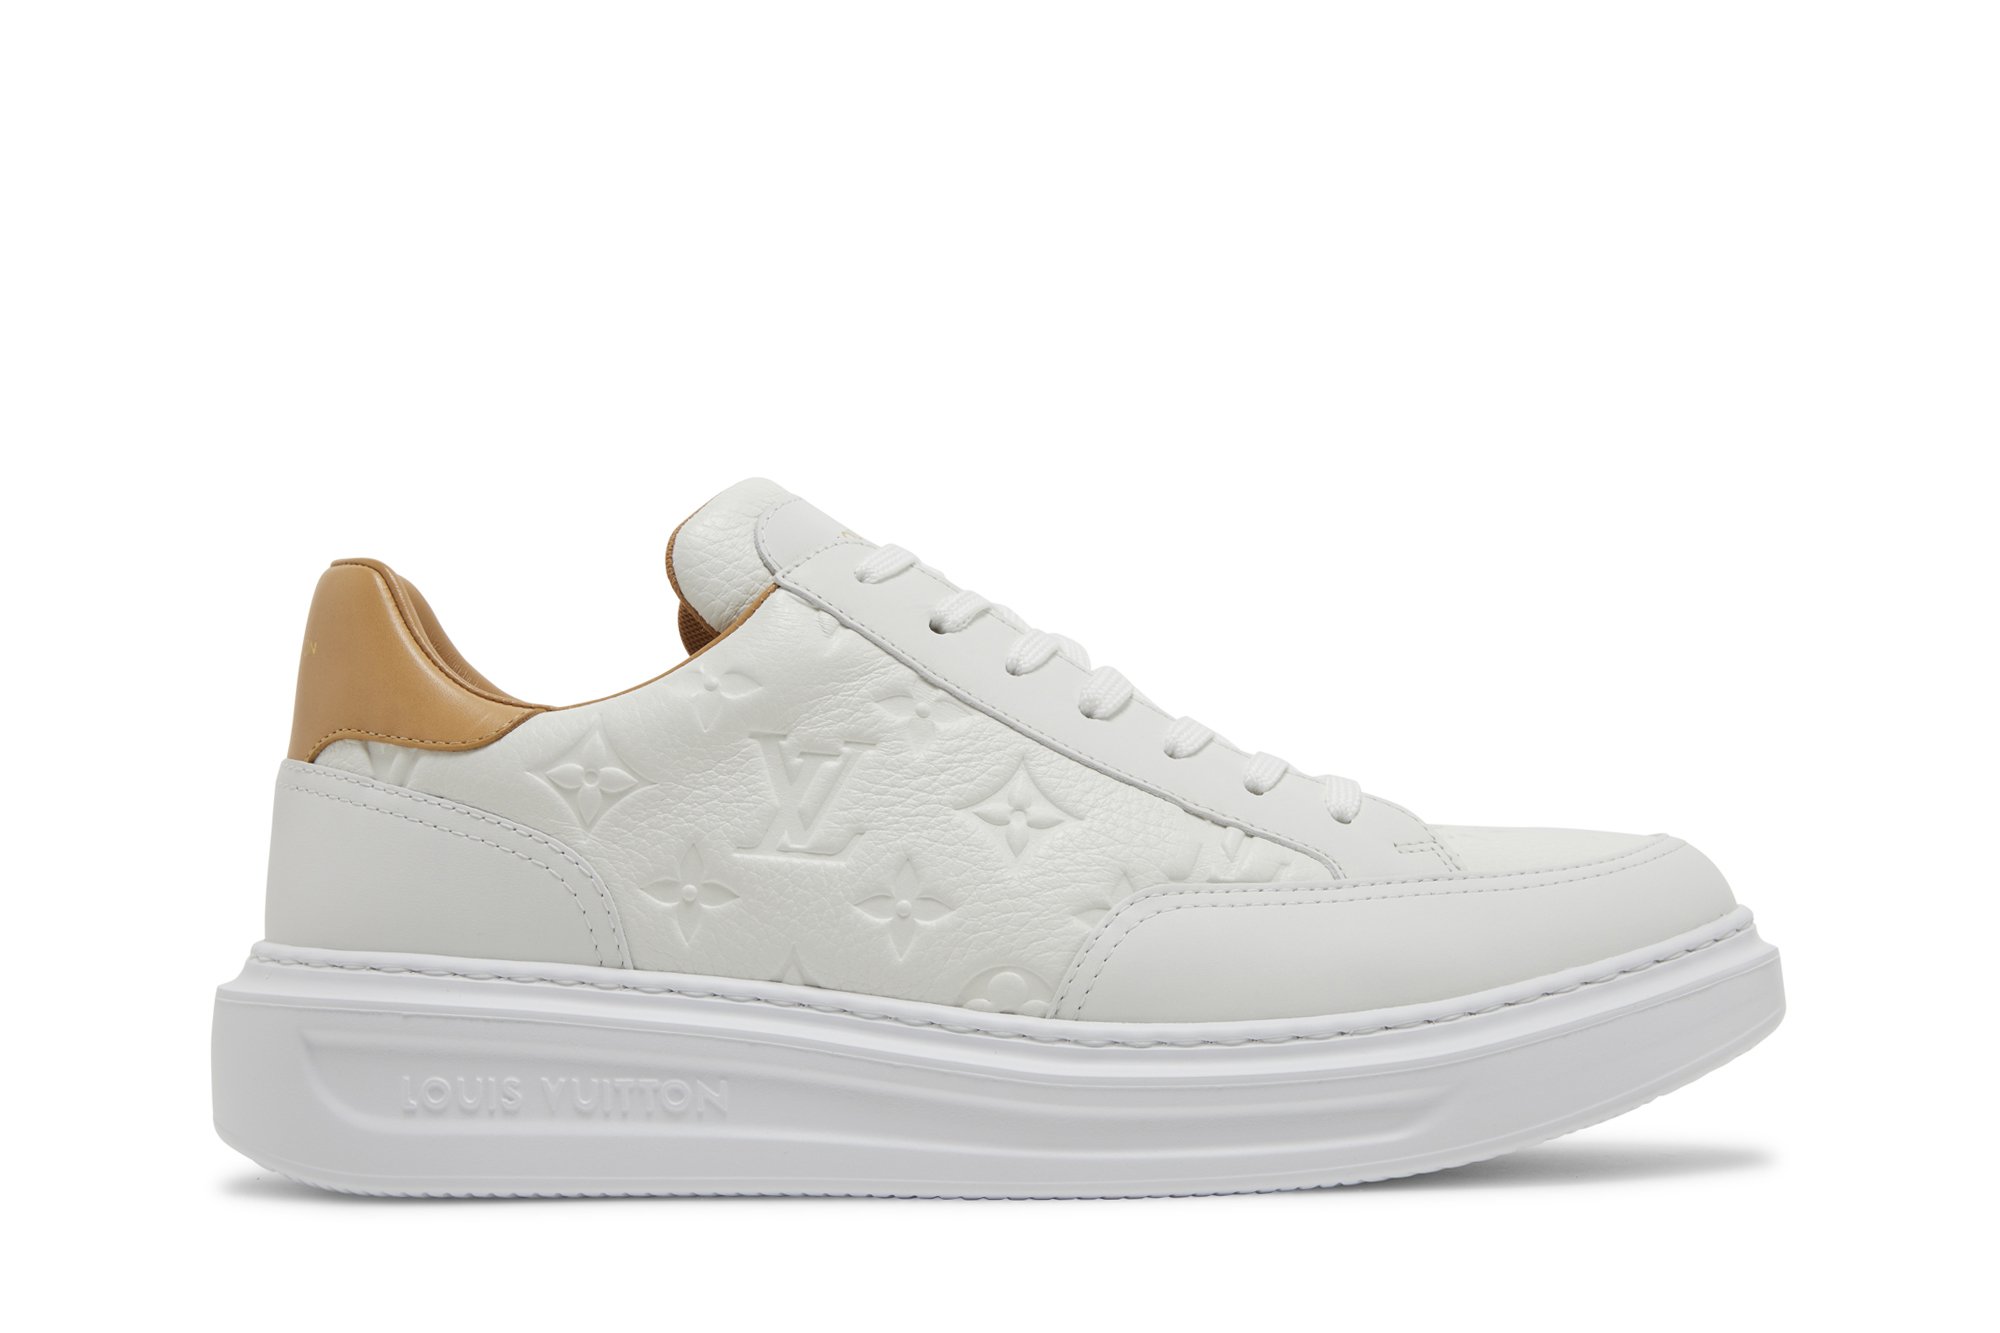 Buy Louis Vuitton Beverly Hills Sneakers  GOAT